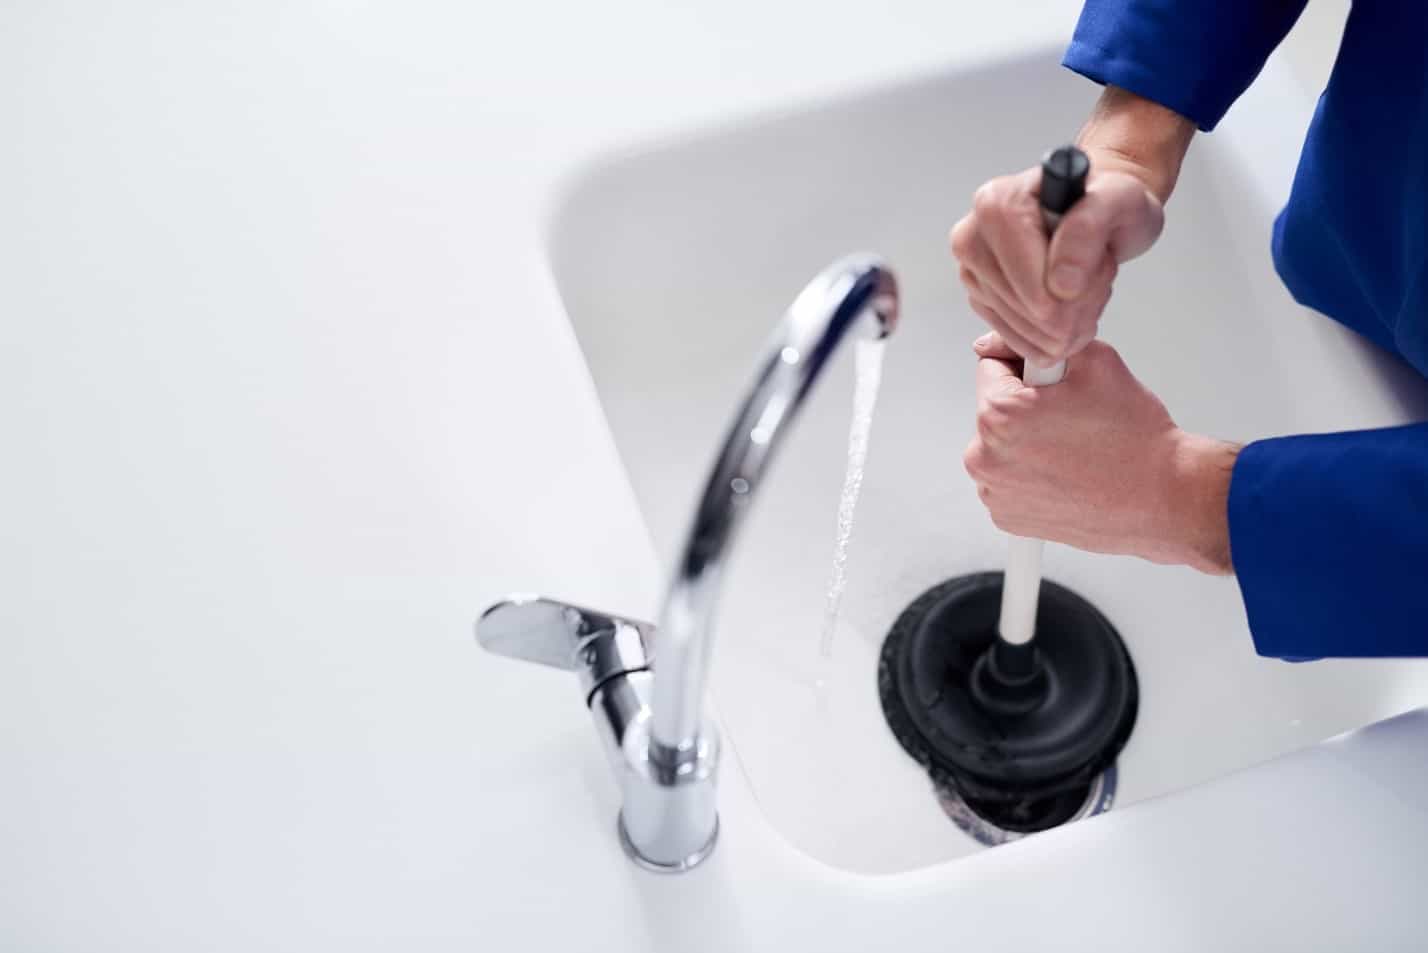 What makes a good plumber and what makes a good service?